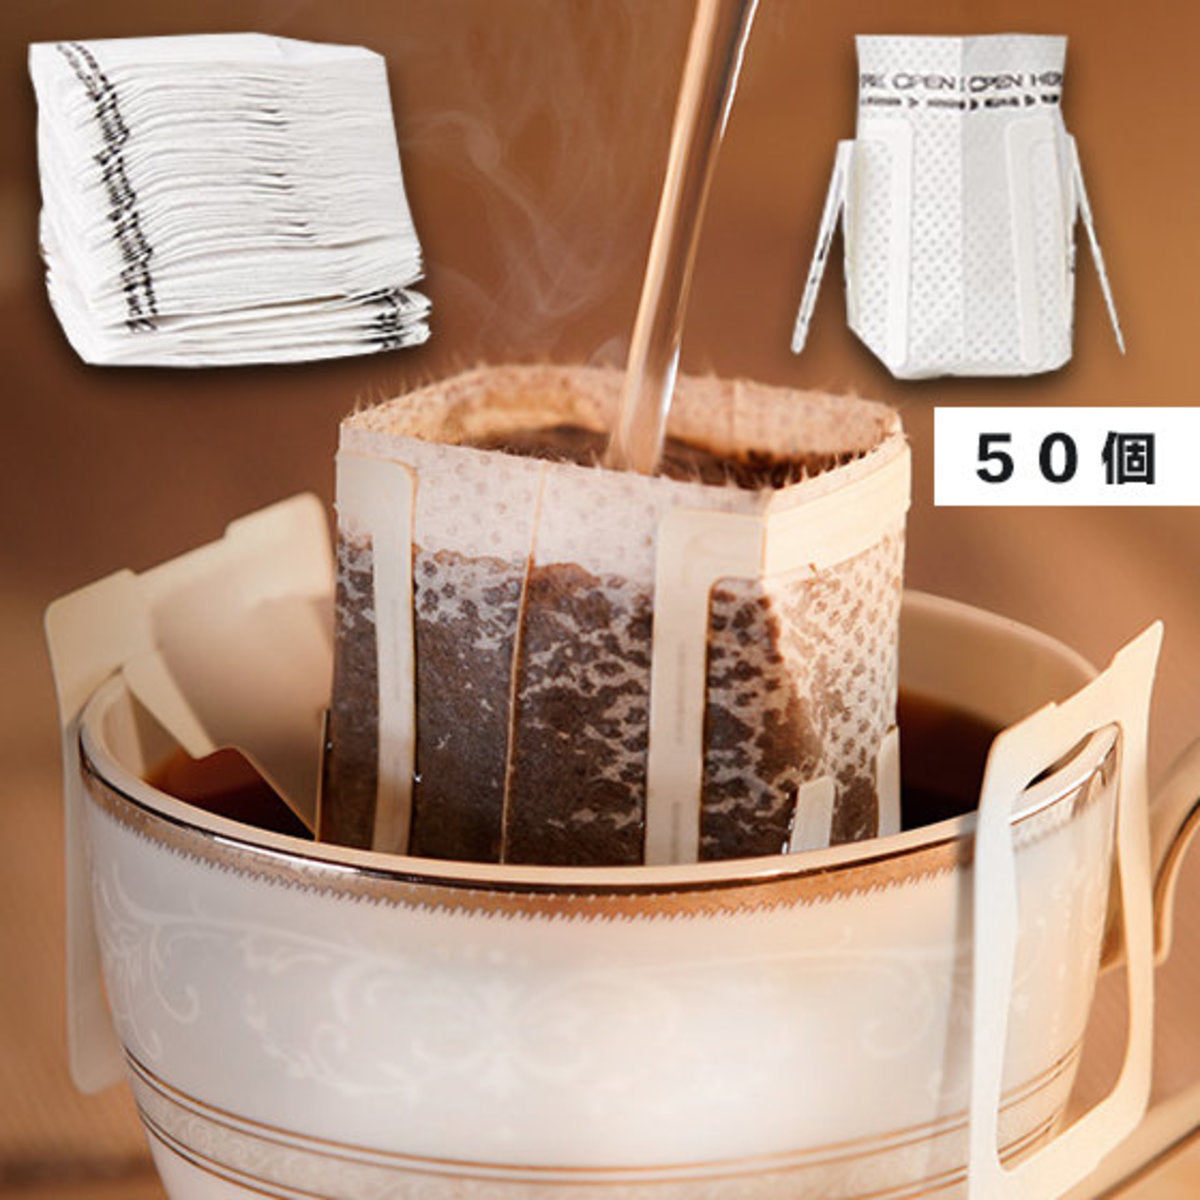 (50 pcs) Portable Coffee Filter Paper Bag Ear Hanging Drip Coffee Bag Disposable Drip Coffee Bag Perfect Choice for Travel Camping Home Office Portable Coffee Maker